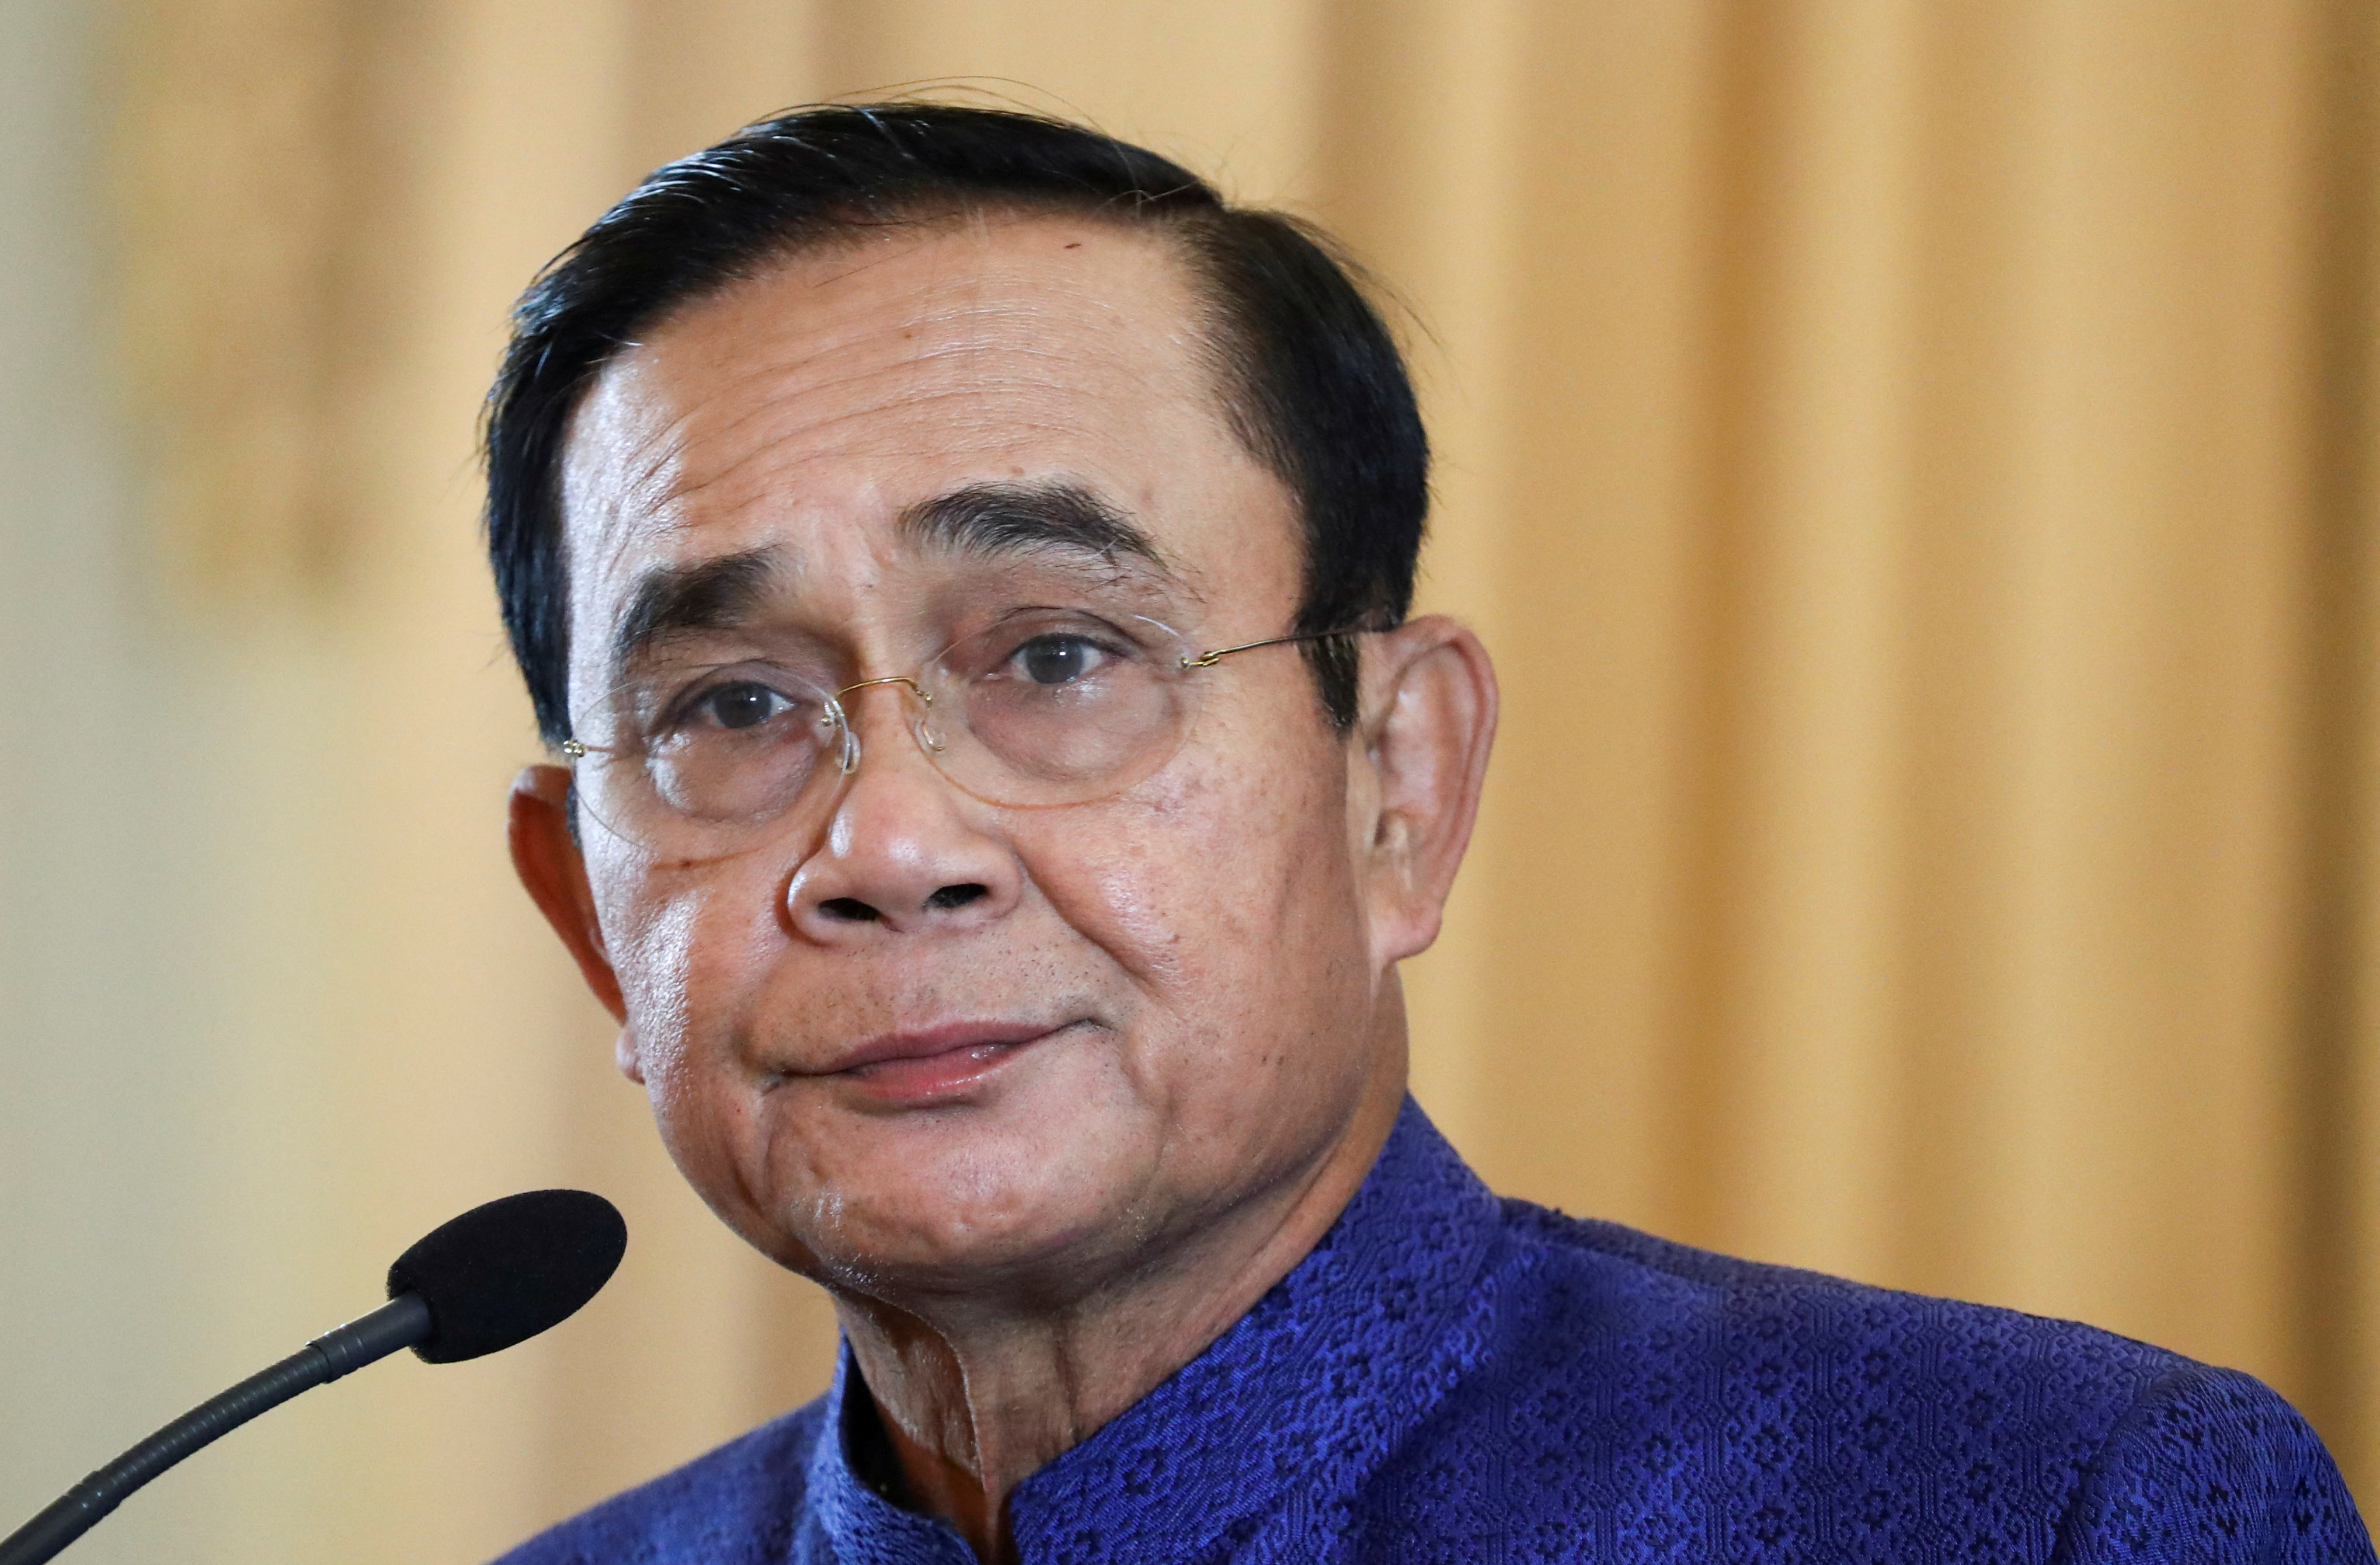 Thailand's Prime Minister Prayuth Chan-ocha speaks during a news conference in Bangkok